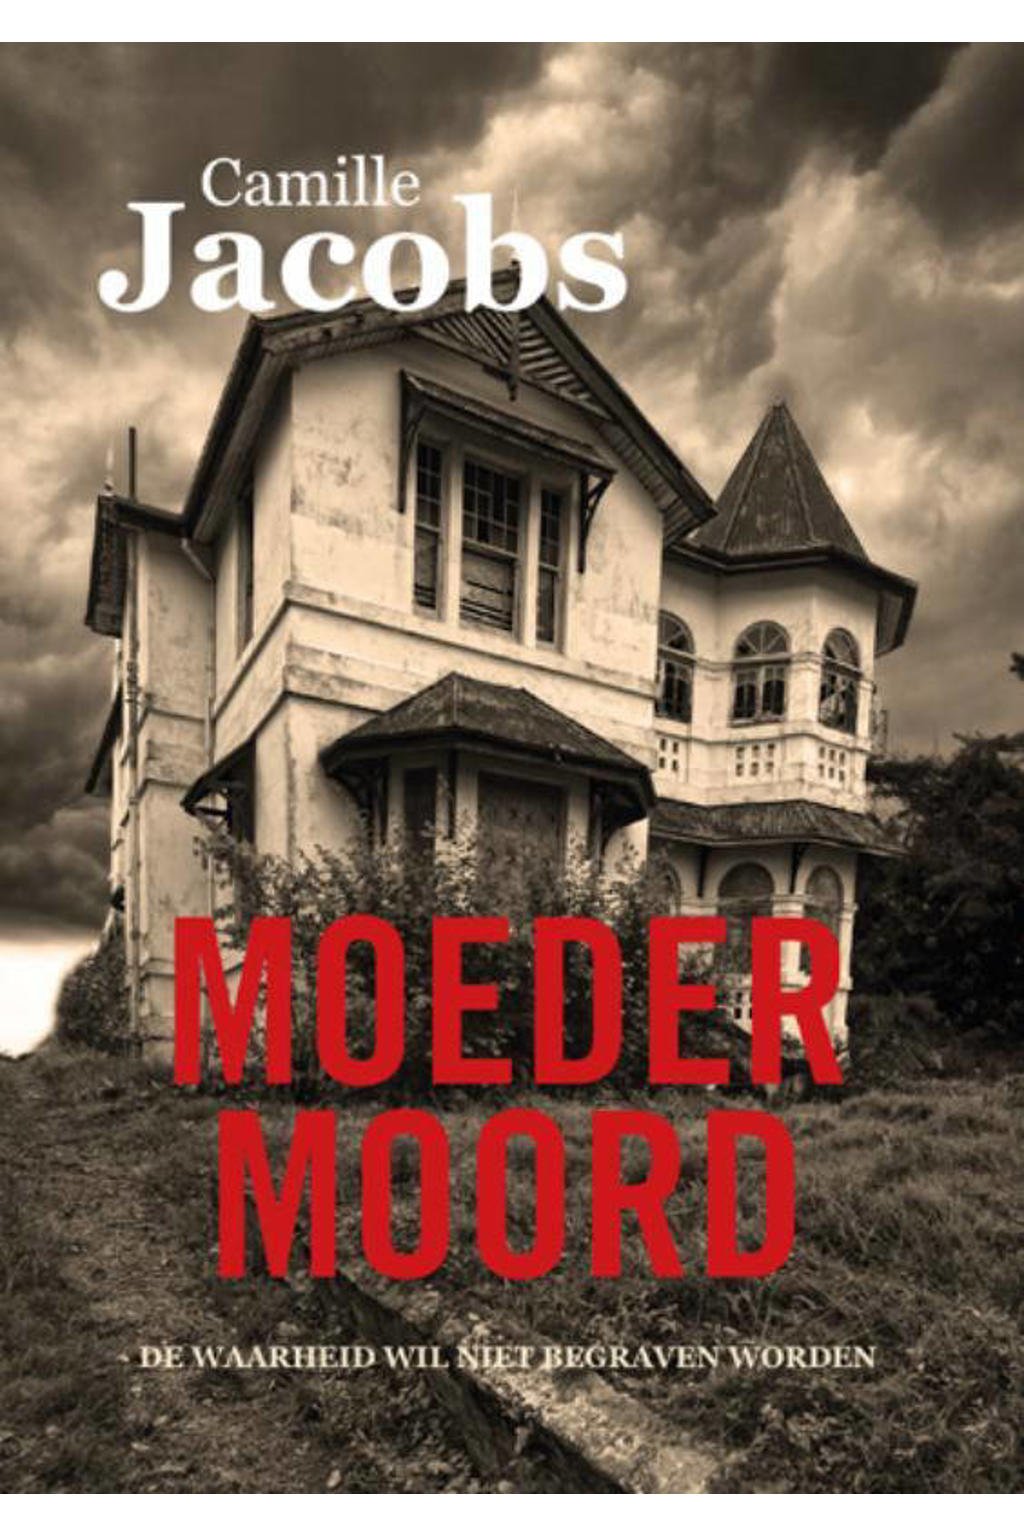 Moedermoord - Camille Jacobs